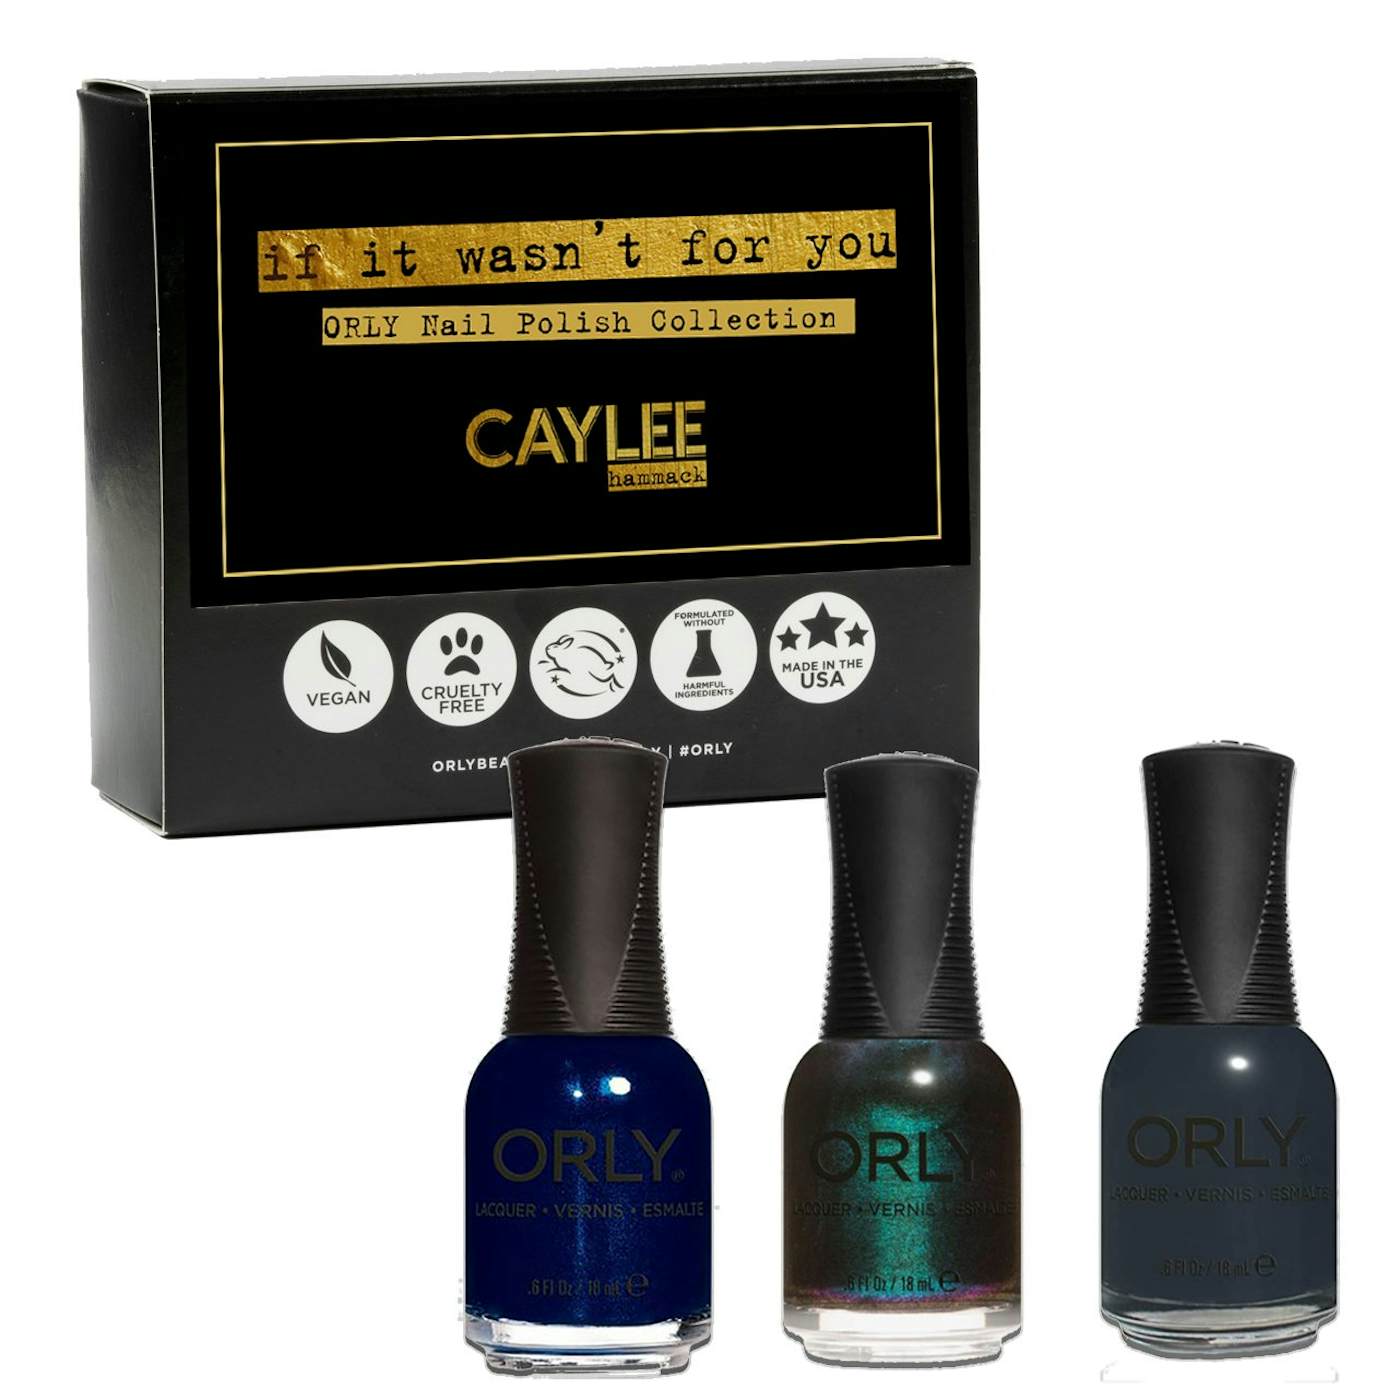 Caylee Hammack If It Wasn't For You Nail Polish Collection 3